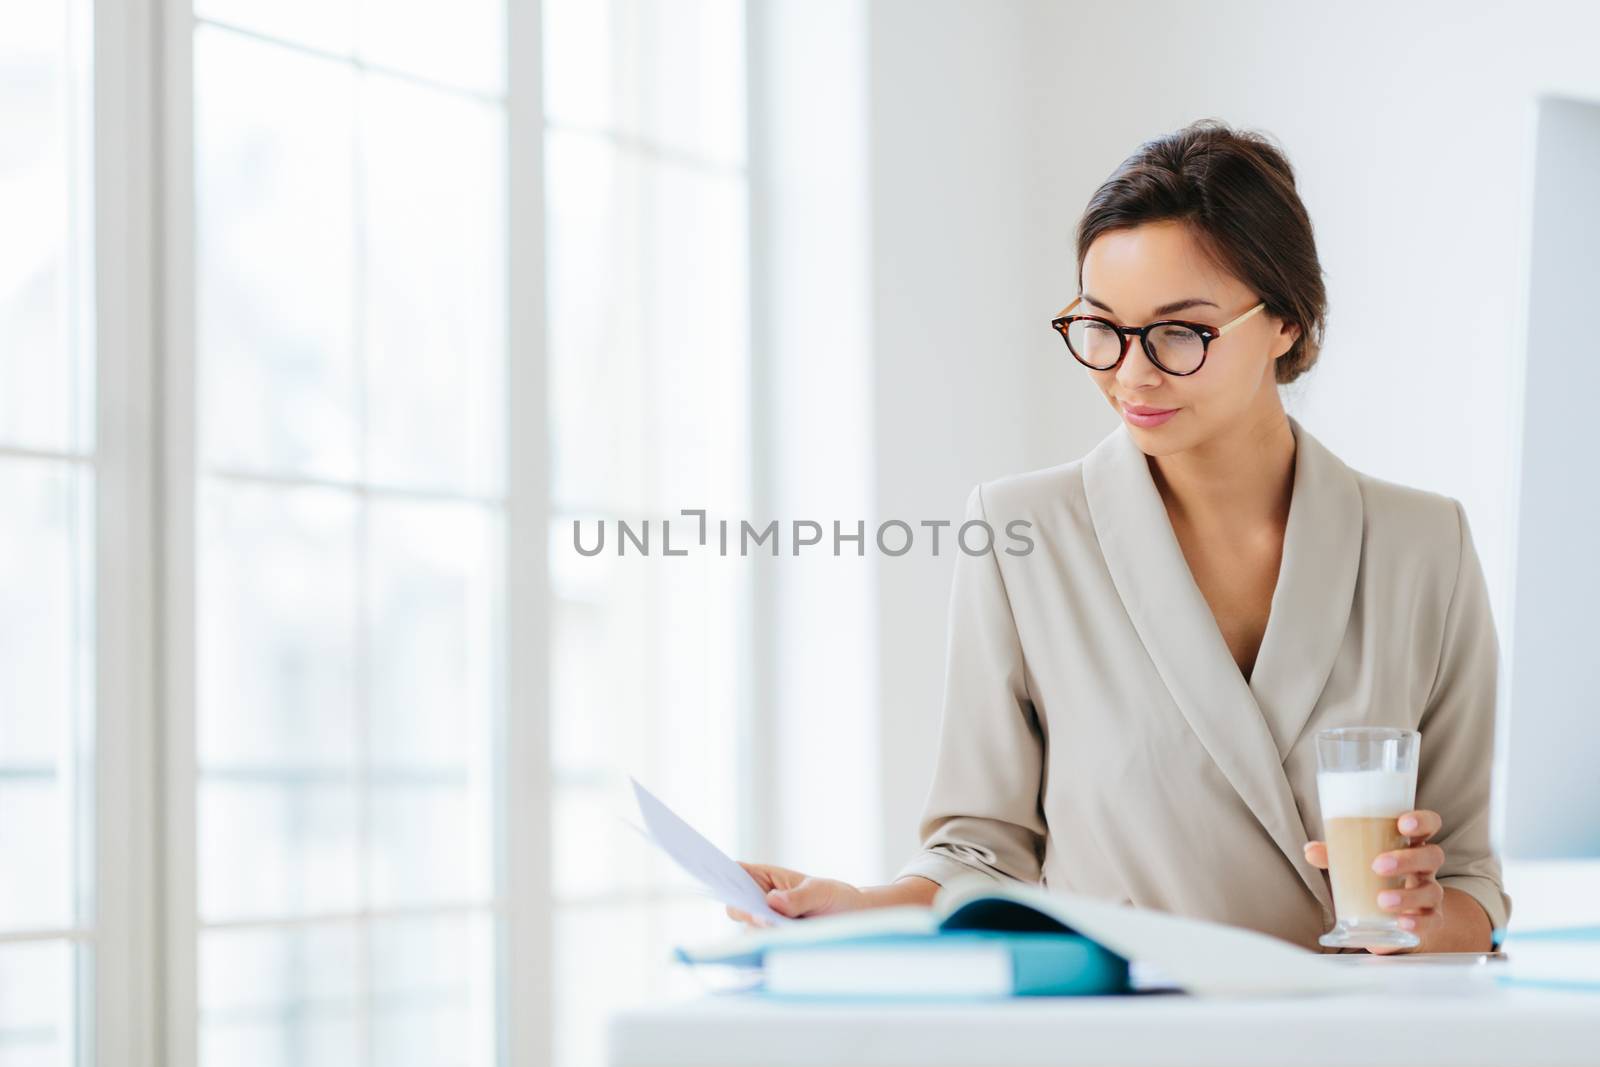 Woman economist checks information on business paper, wears spectacles and elegant suit, drinks milkshake, poses against office interior, being in cabinet, prepares startup project. Working process